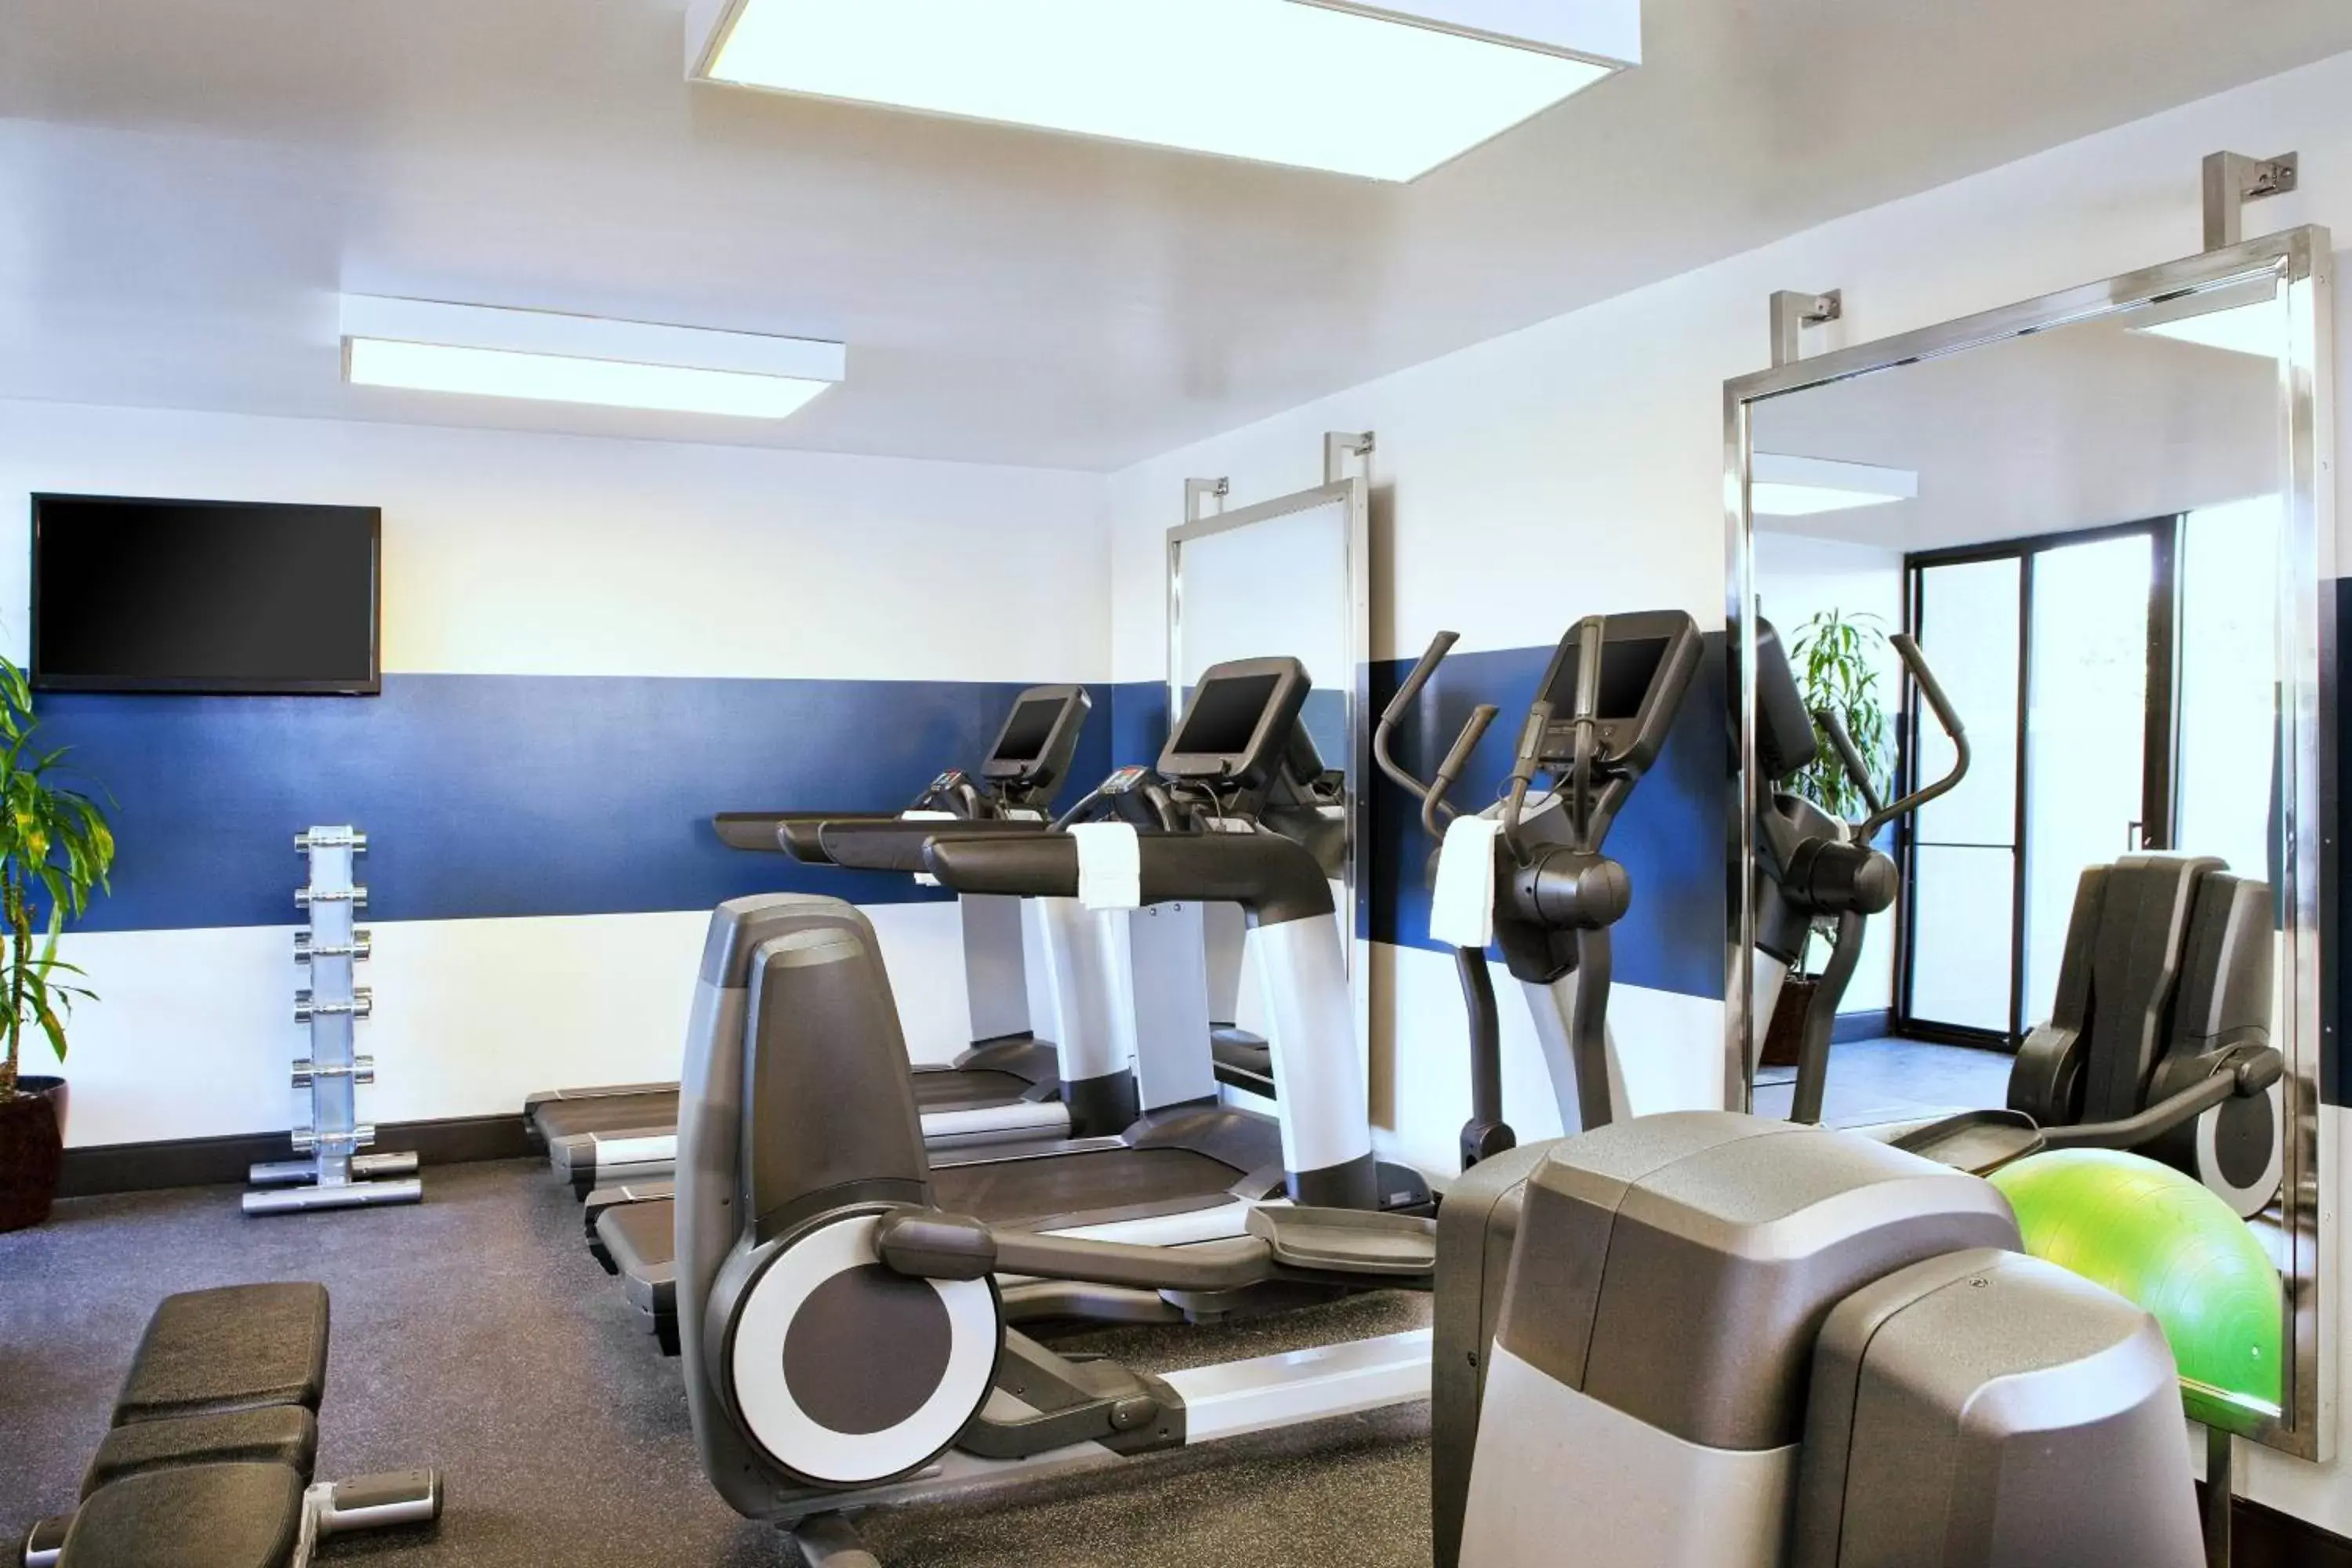 Fitness centre/facilities, Fitness Center/Facilities in Four Points by Sheraton - San Francisco Bay Bridge